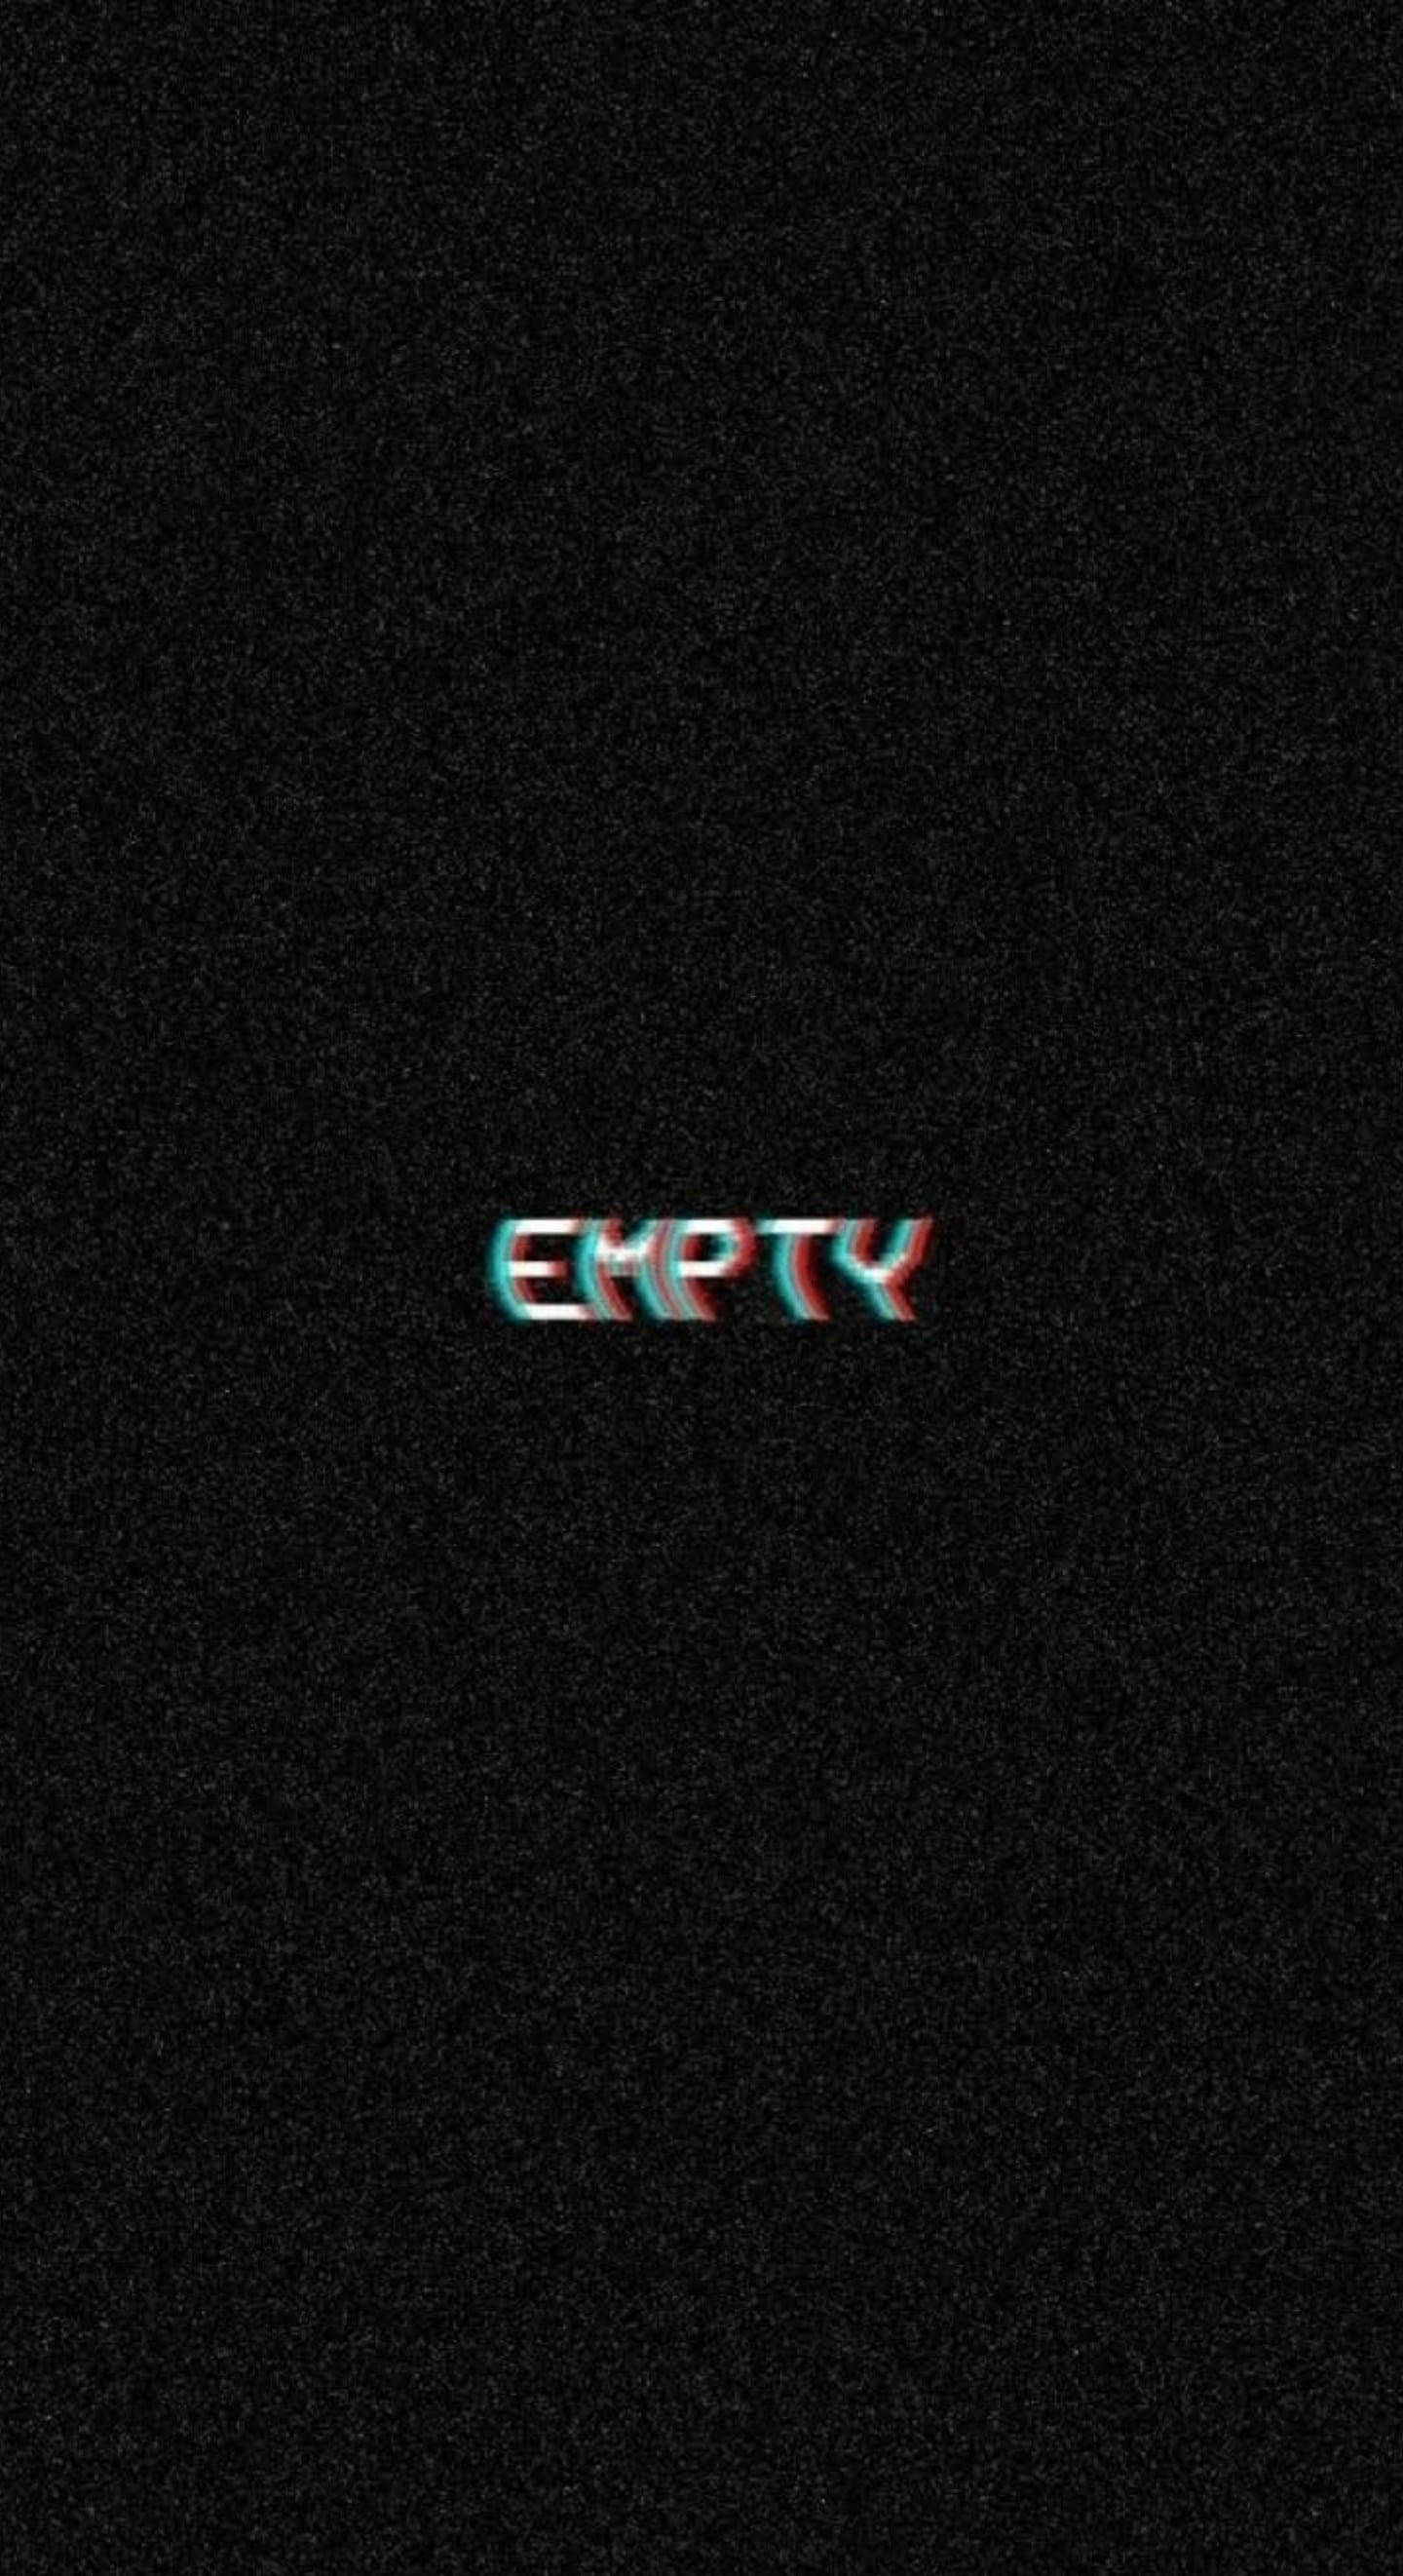 The dark background with a white text that says empt - Depressing, depression